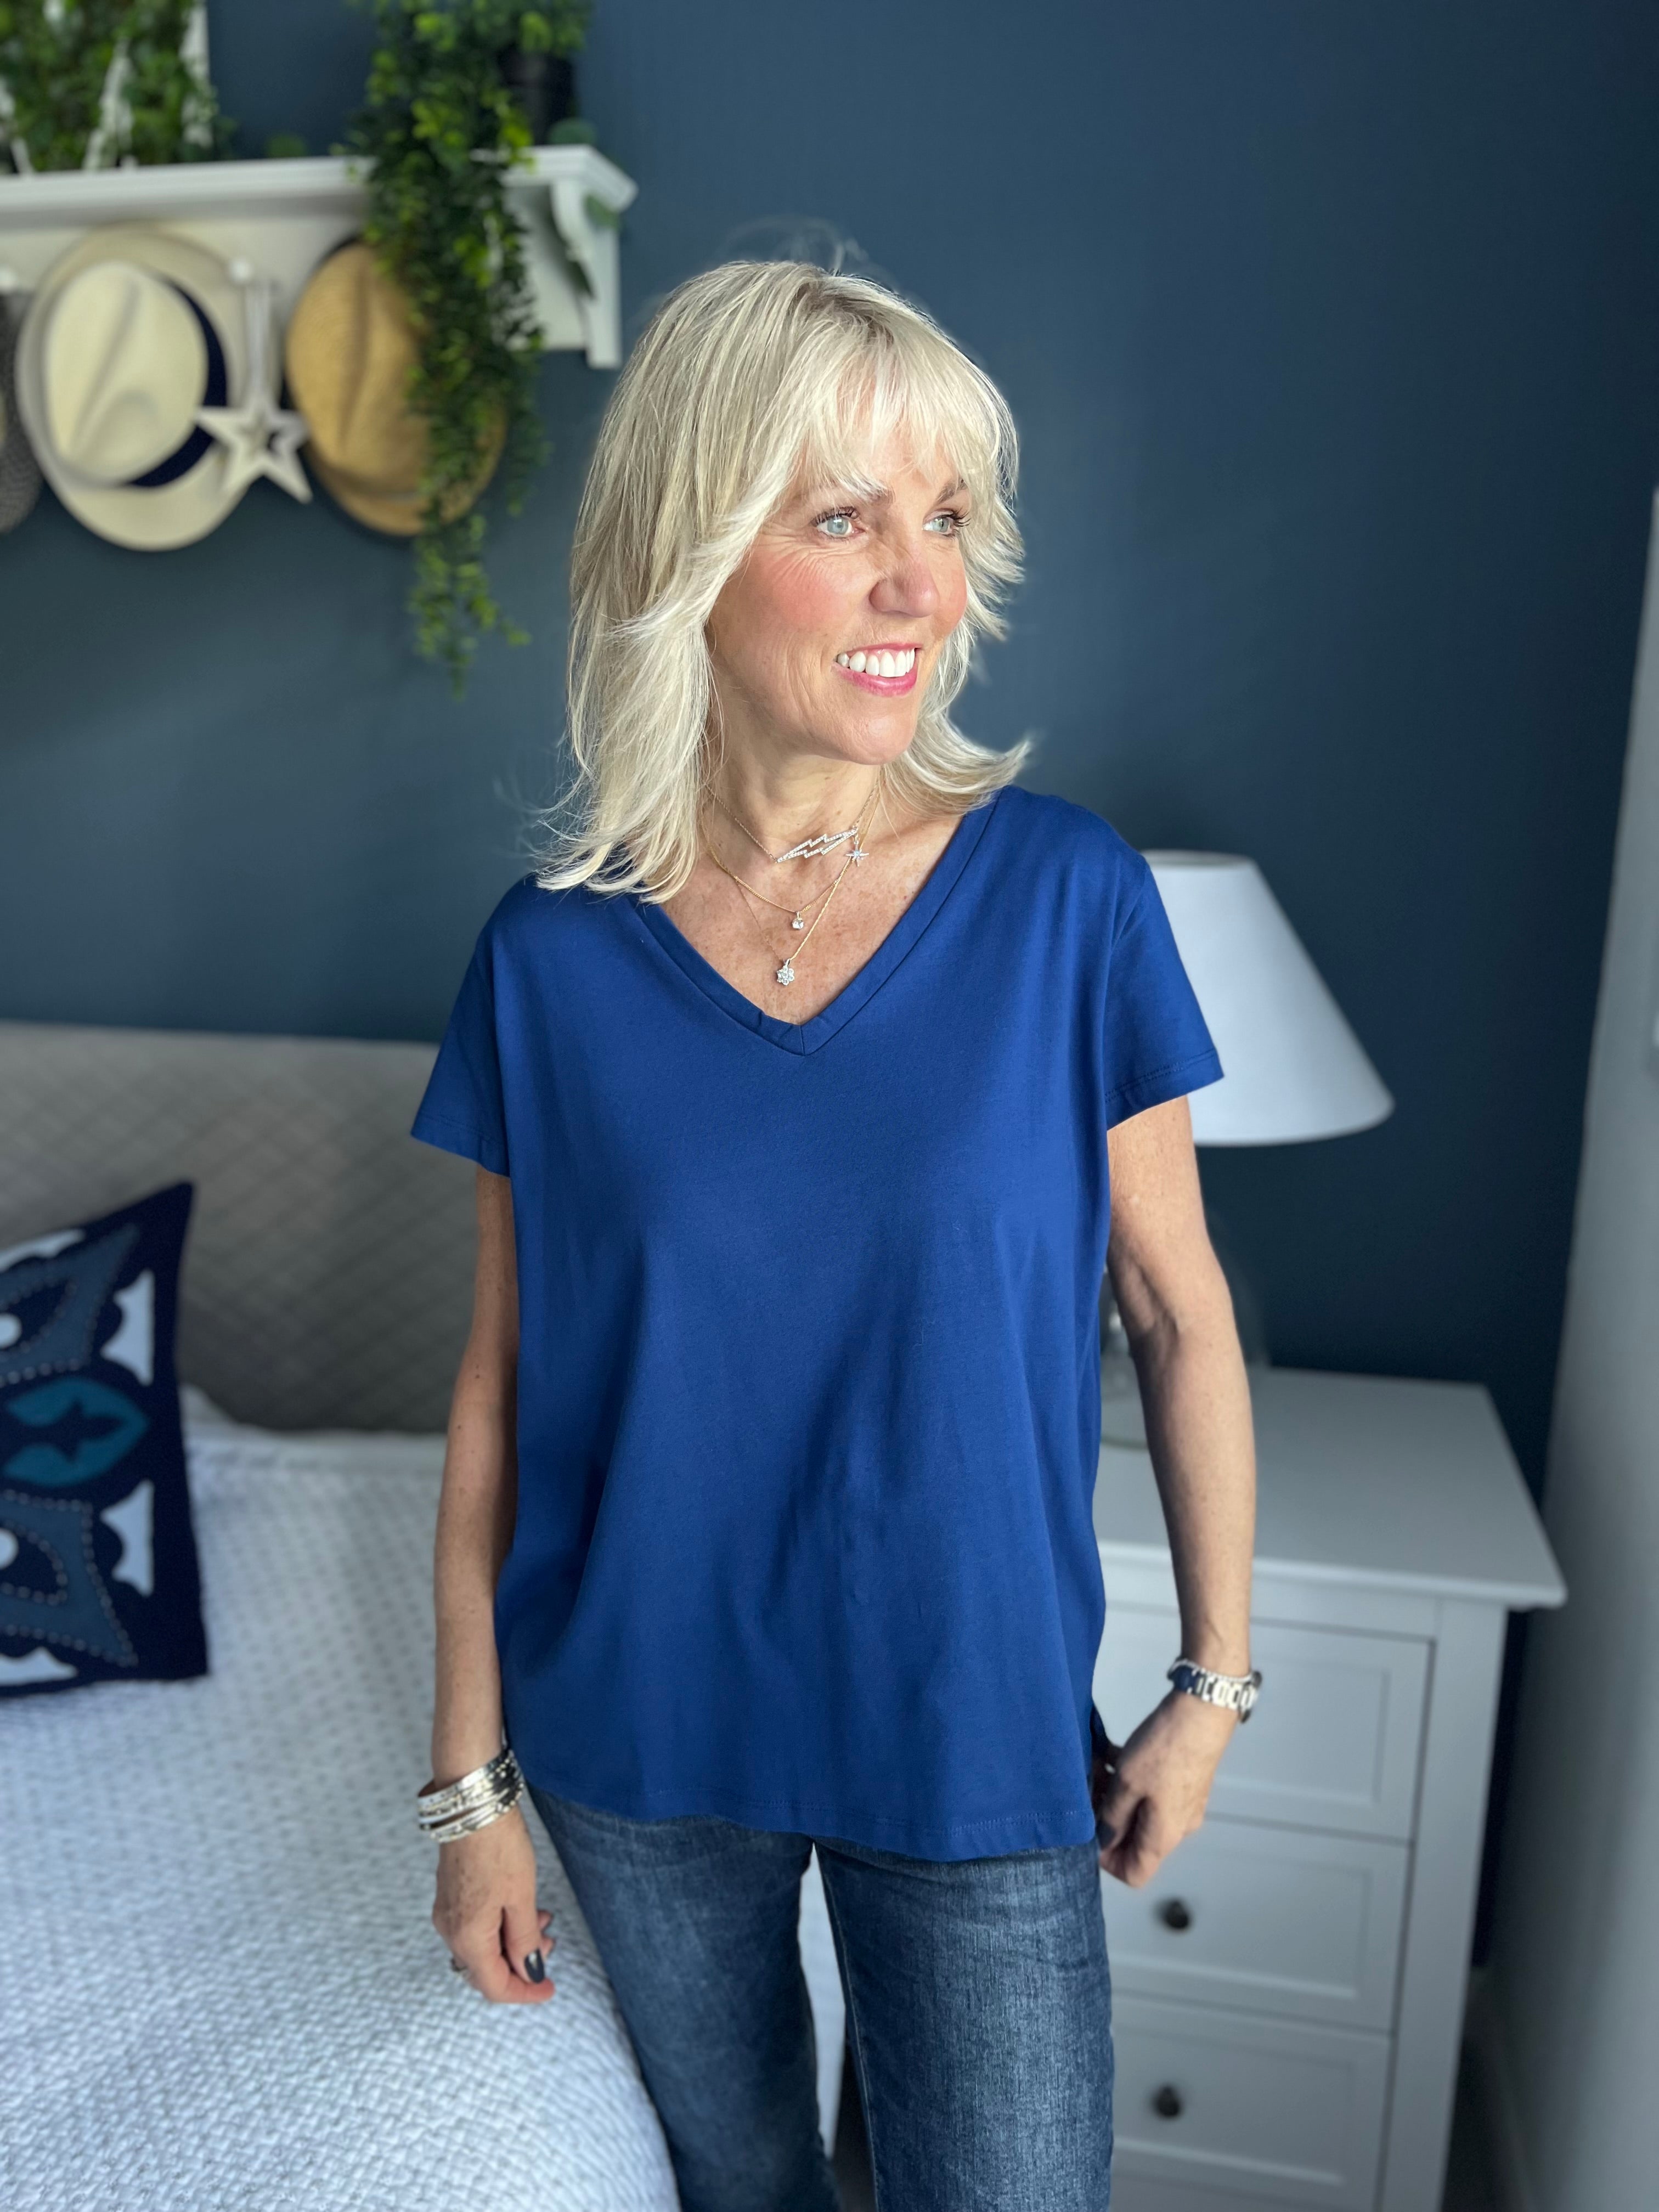 Cotton V Neck Tee in Sea Blue